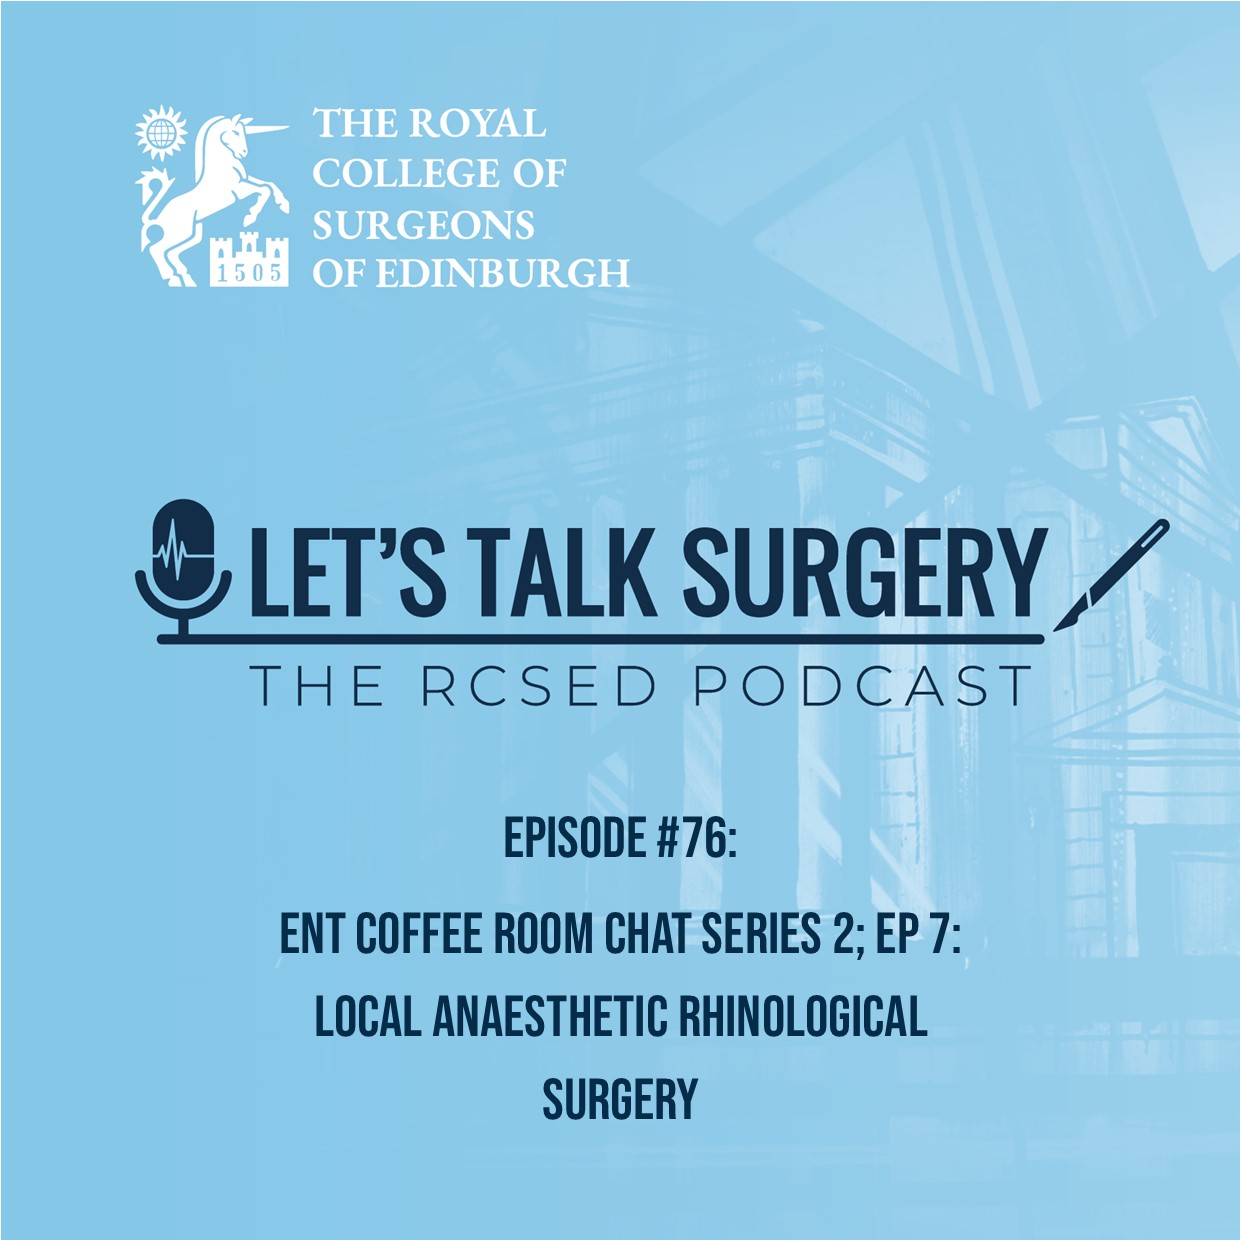 ENT Coffee Room Chat Series 2: Ep 7 - Local anaesthetic rhinological surgery: indications and techniques